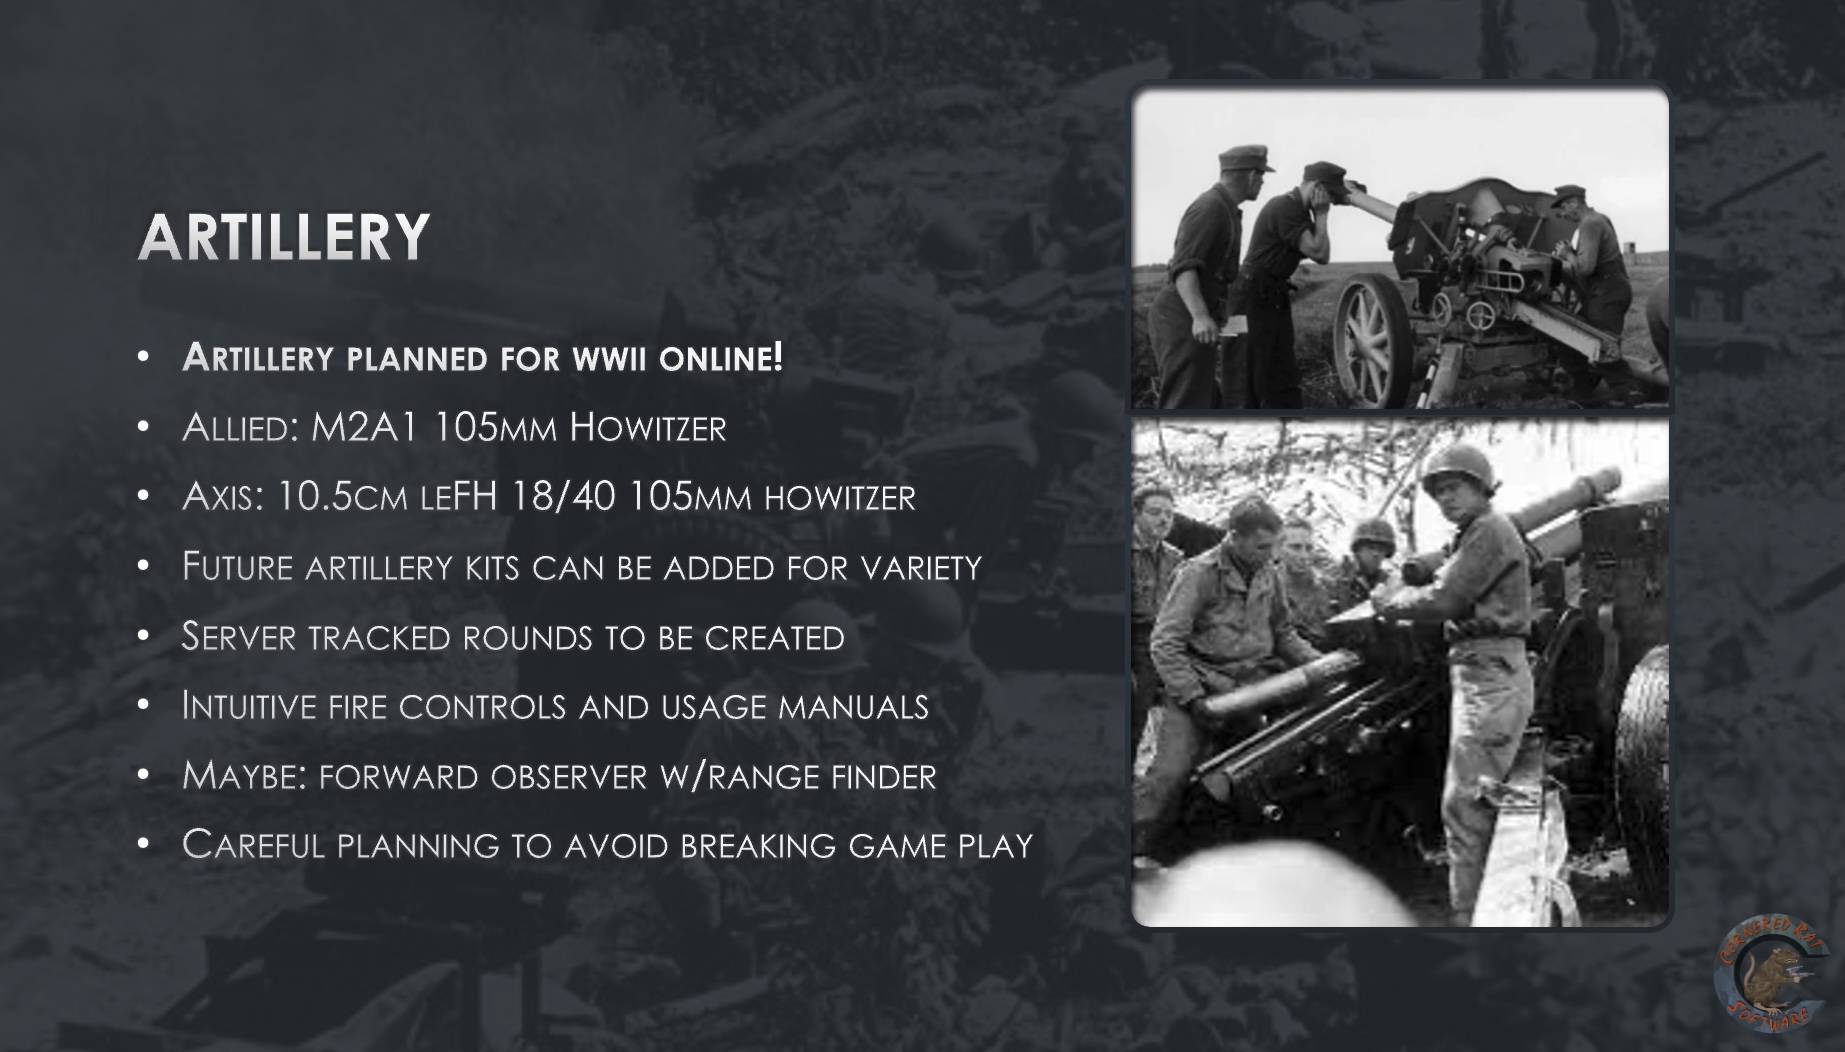 Artillery Incoming to WWII Online